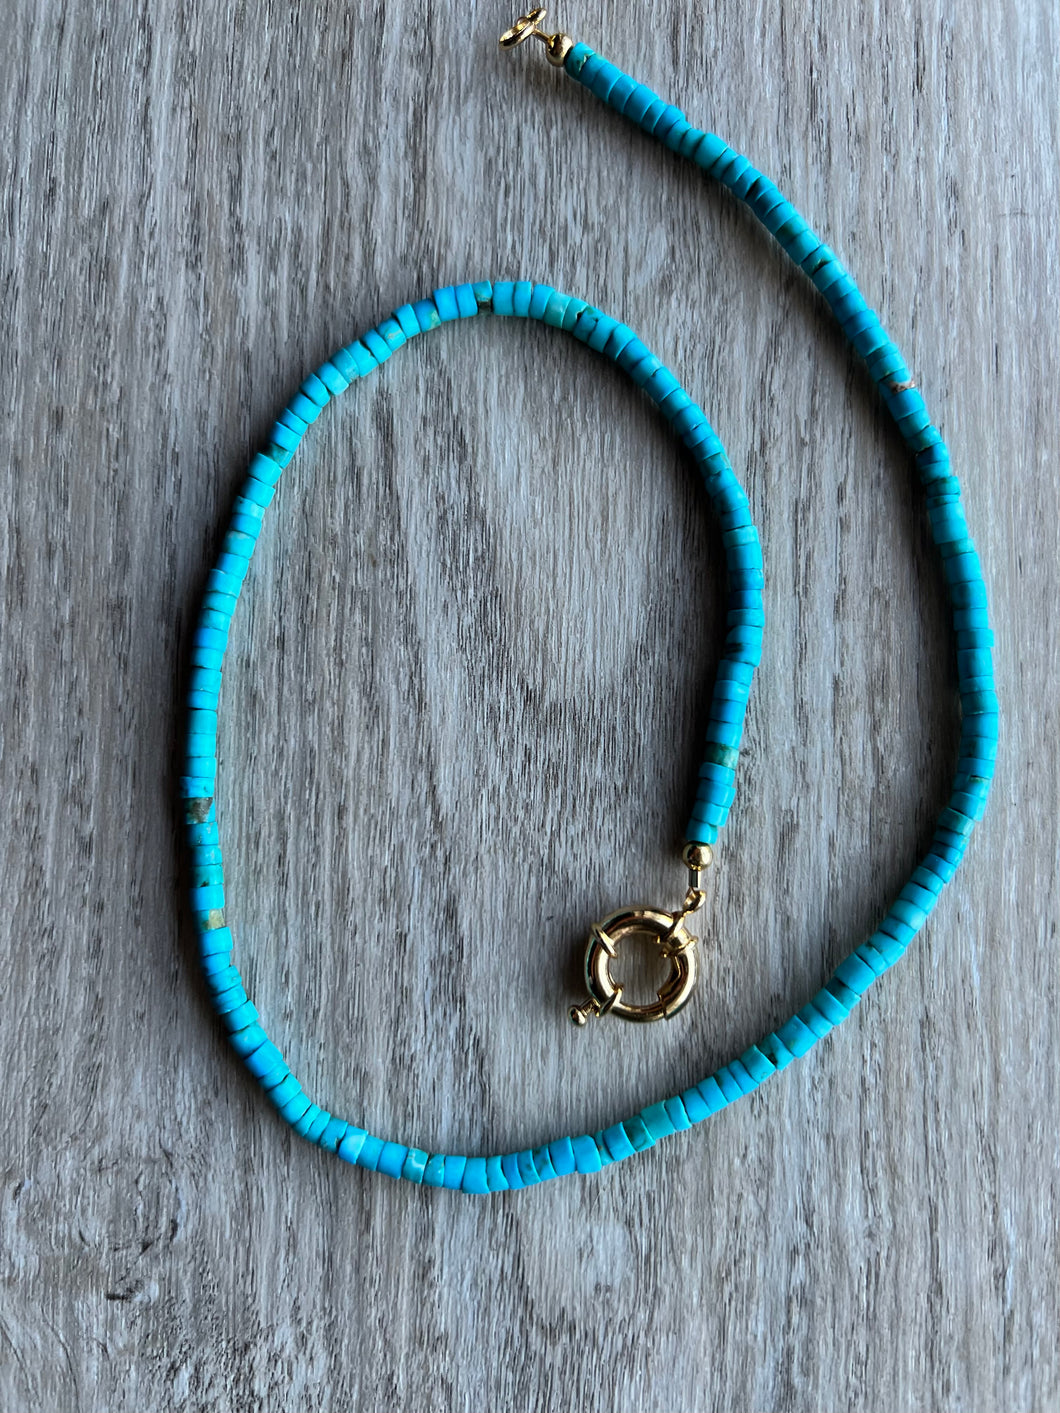 A perfect layering piece, this turquoise heishi necklace measures 19 inches   Finished off with gold filled end caps and a gold filled sailor's clasp